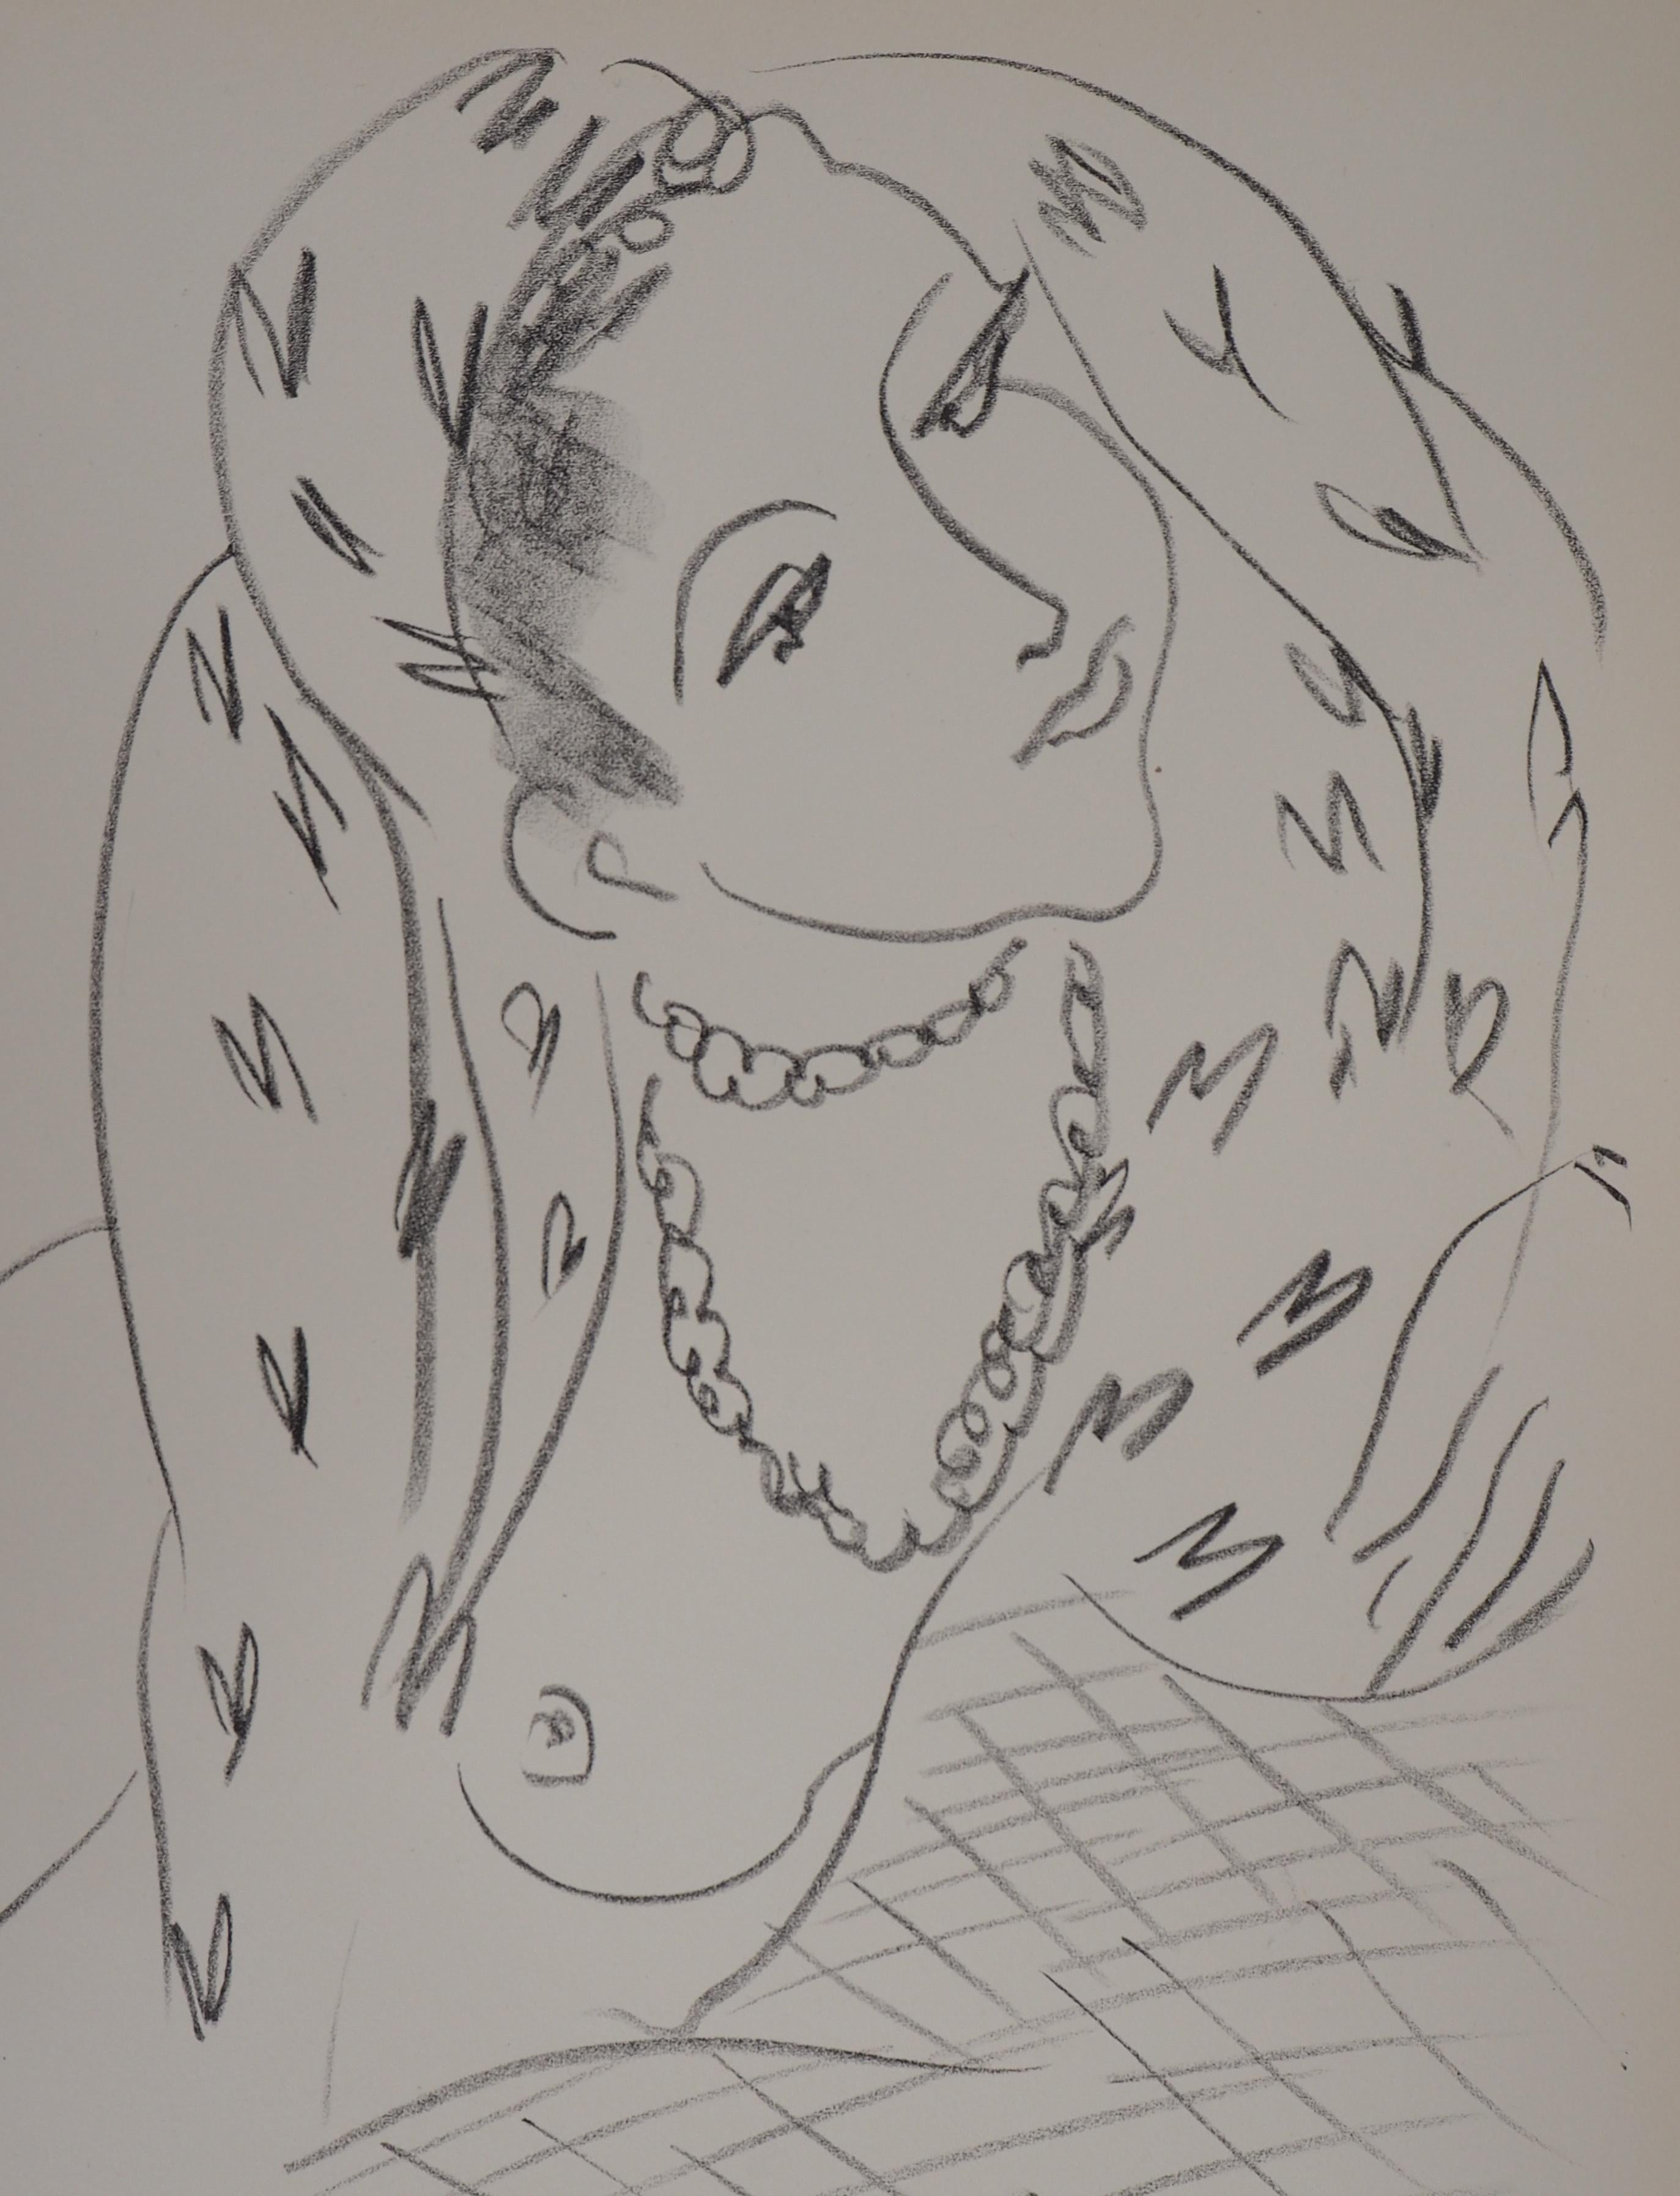 Bohemian Woman : The Fortune Teller - Lithograph, 1943  - Print by (after) Henri Matisse